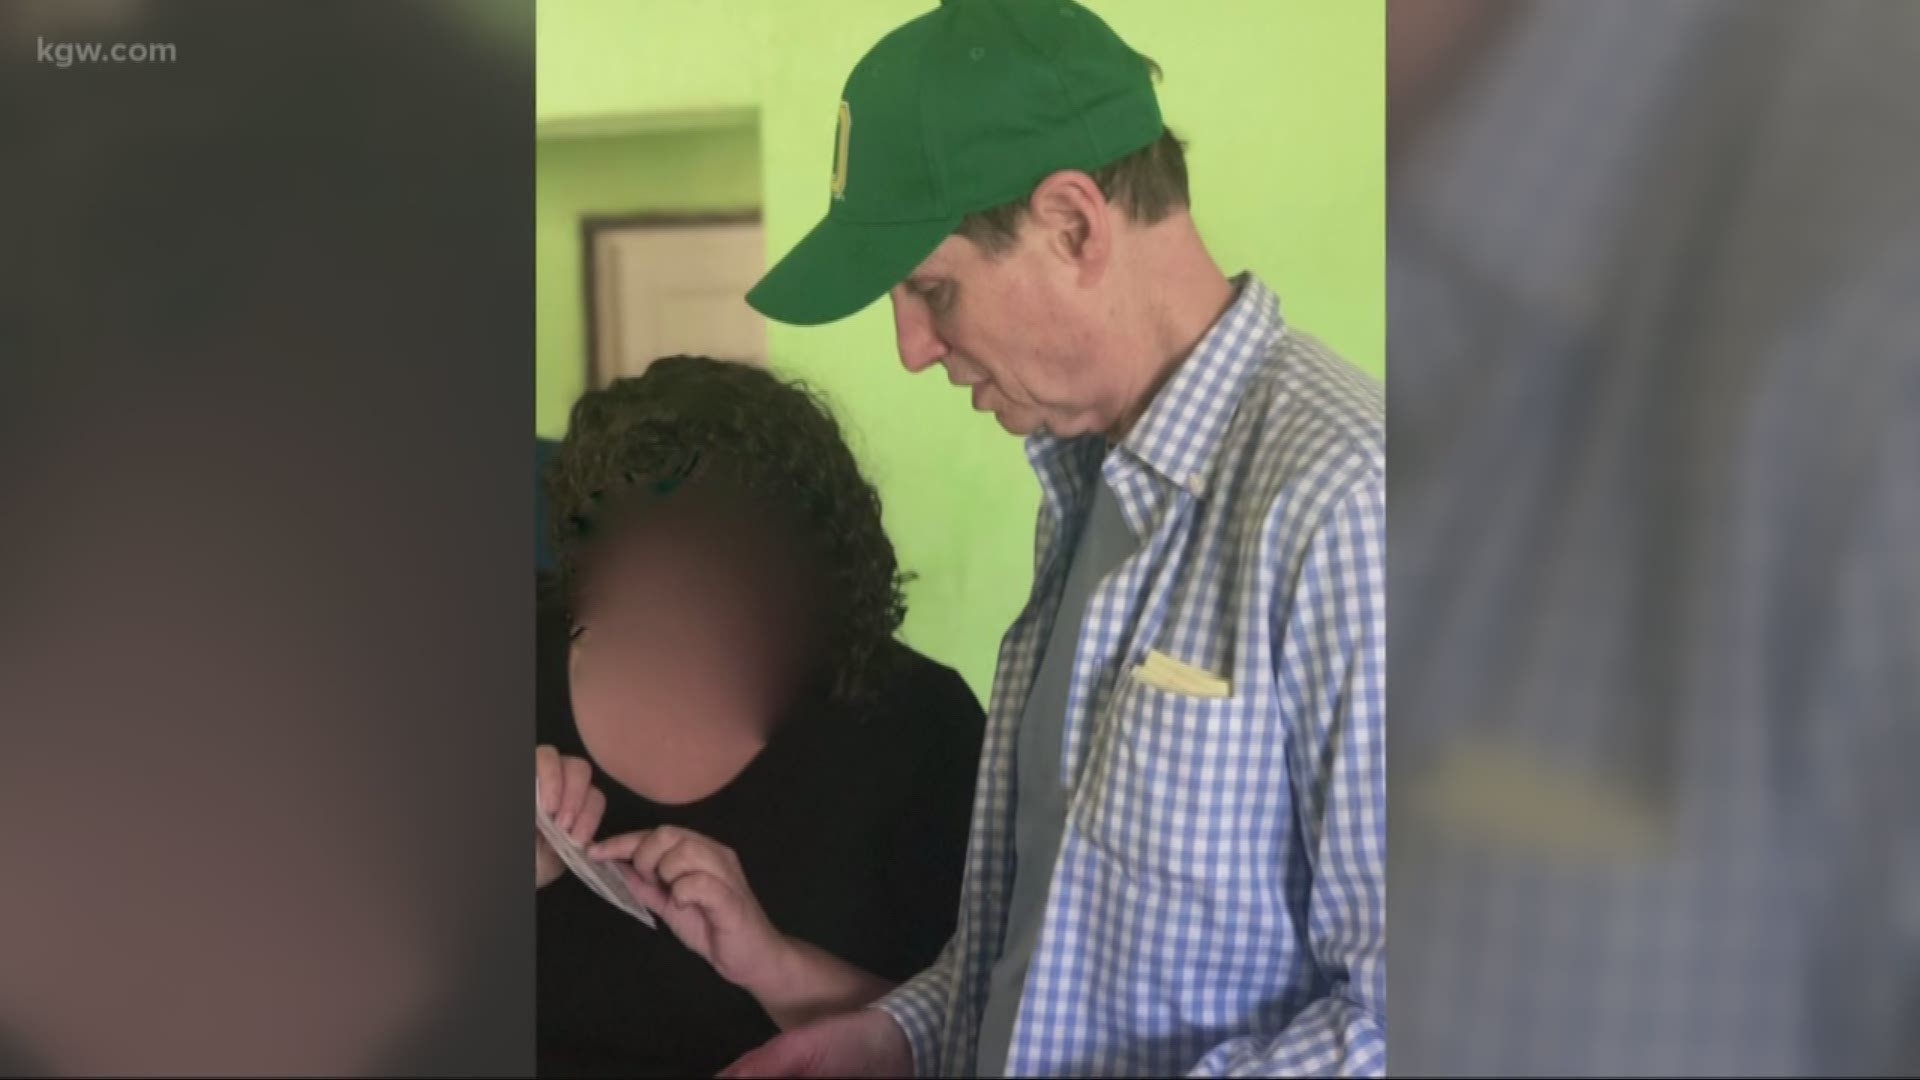 U.S. Senator Ron Wyden’s trip to the border this weekend is making national headlines after he helped a pregnant woman get the medical help she desperately needed. Wyden, a senator from Oregon, shared photos and videos from the trip on his Twitter account.